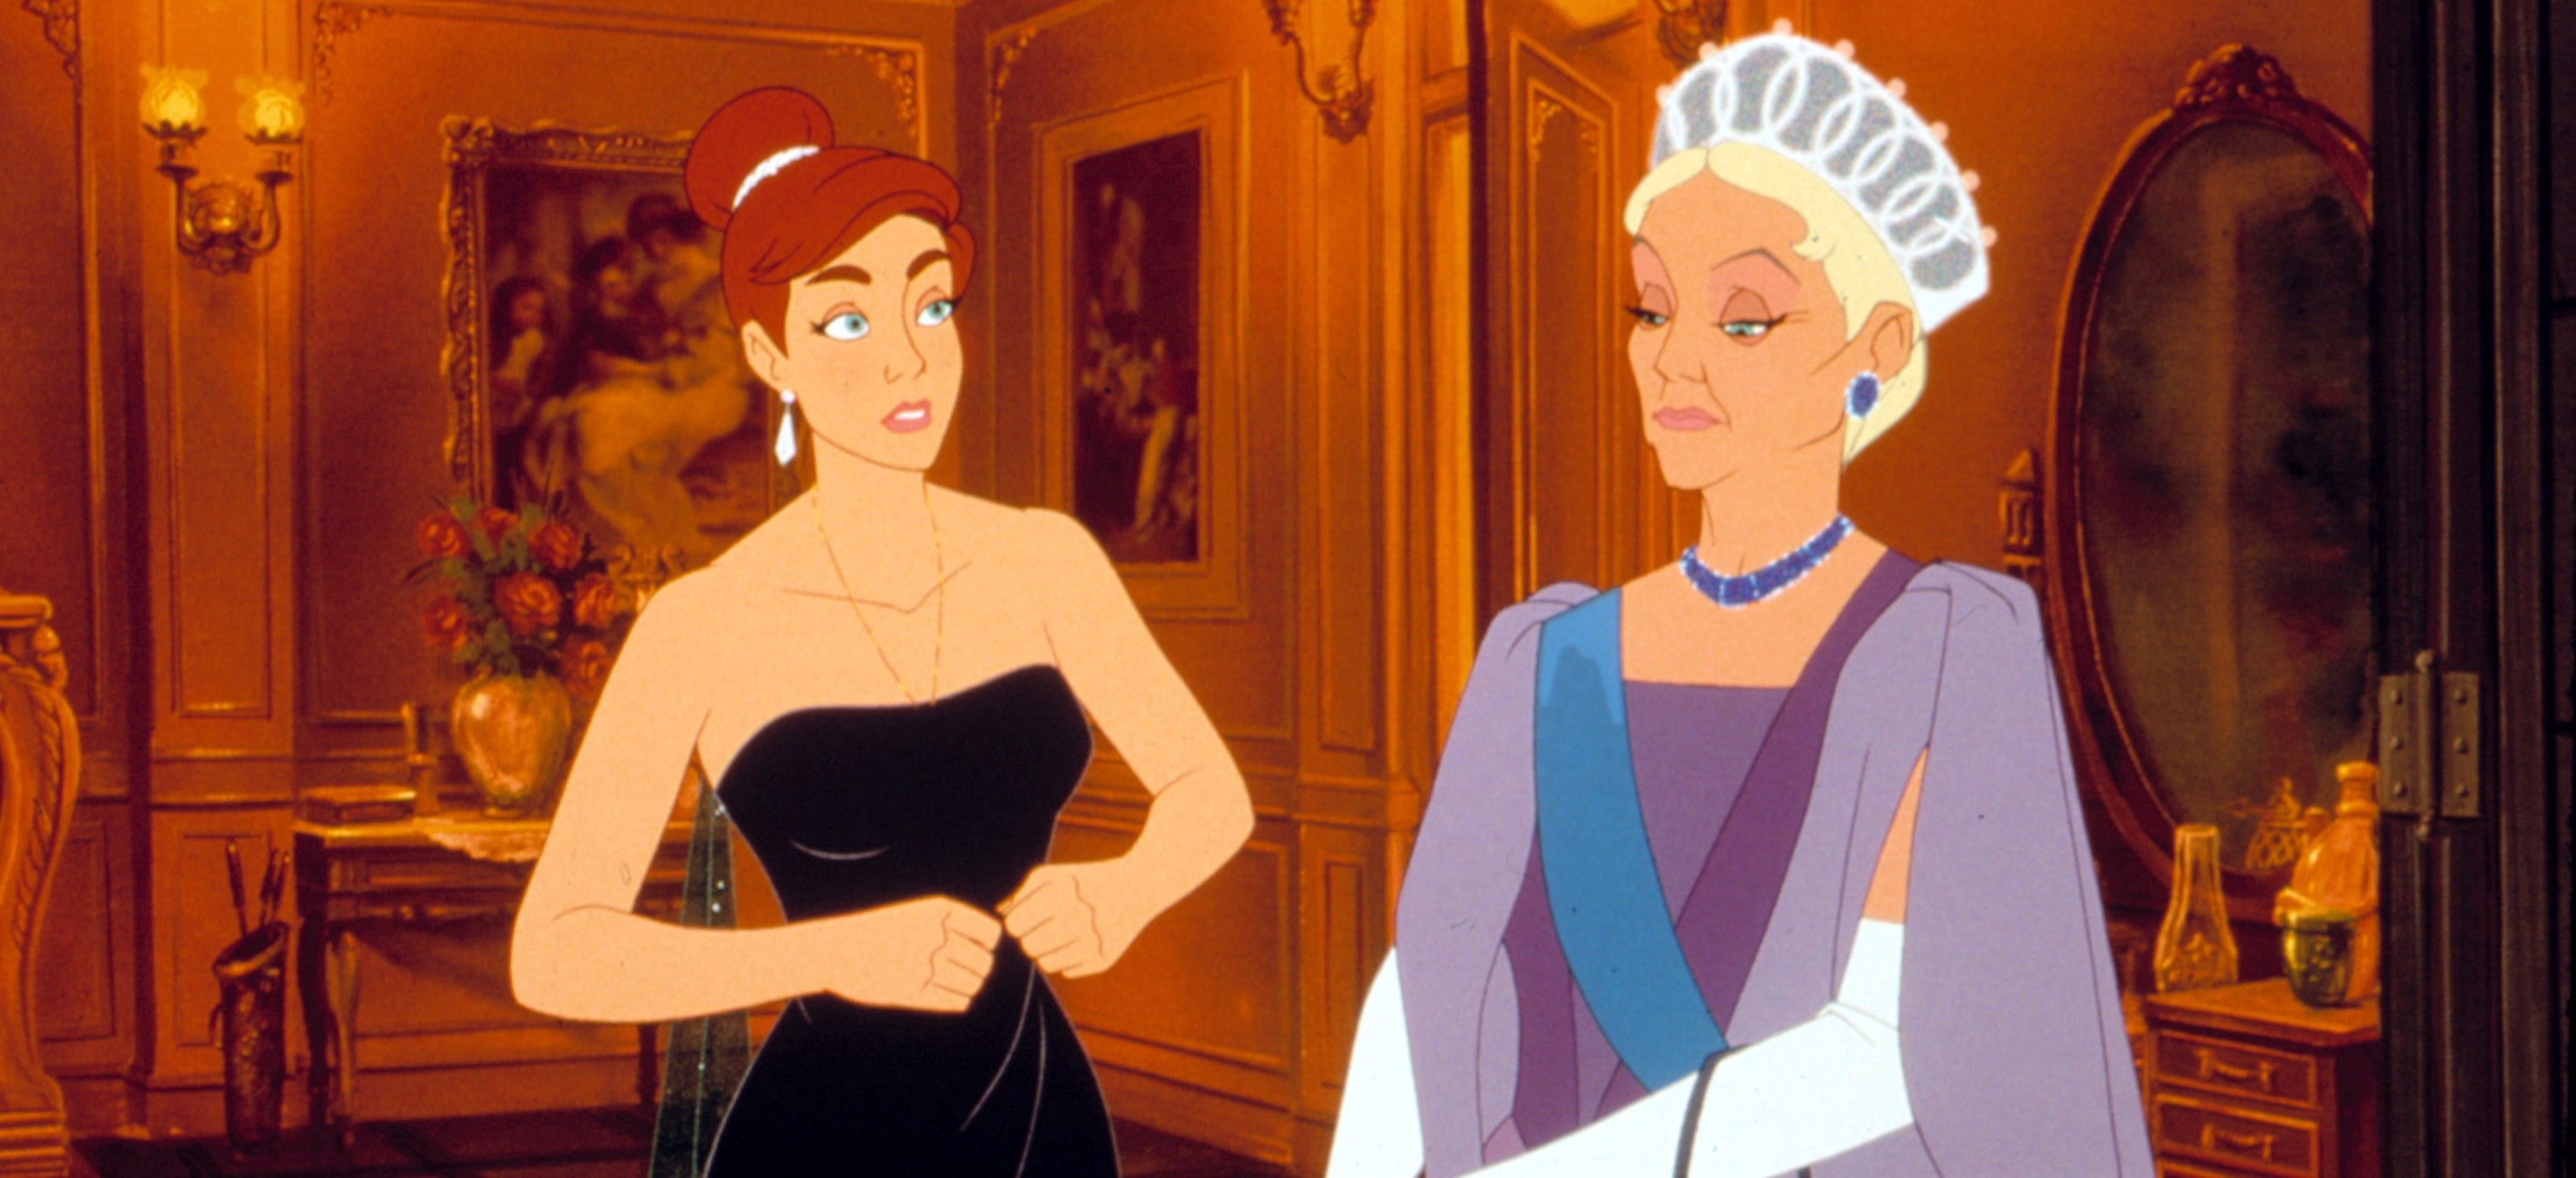 The Other Princess: 25 Things About The Anastasia Movie That Make No Sense